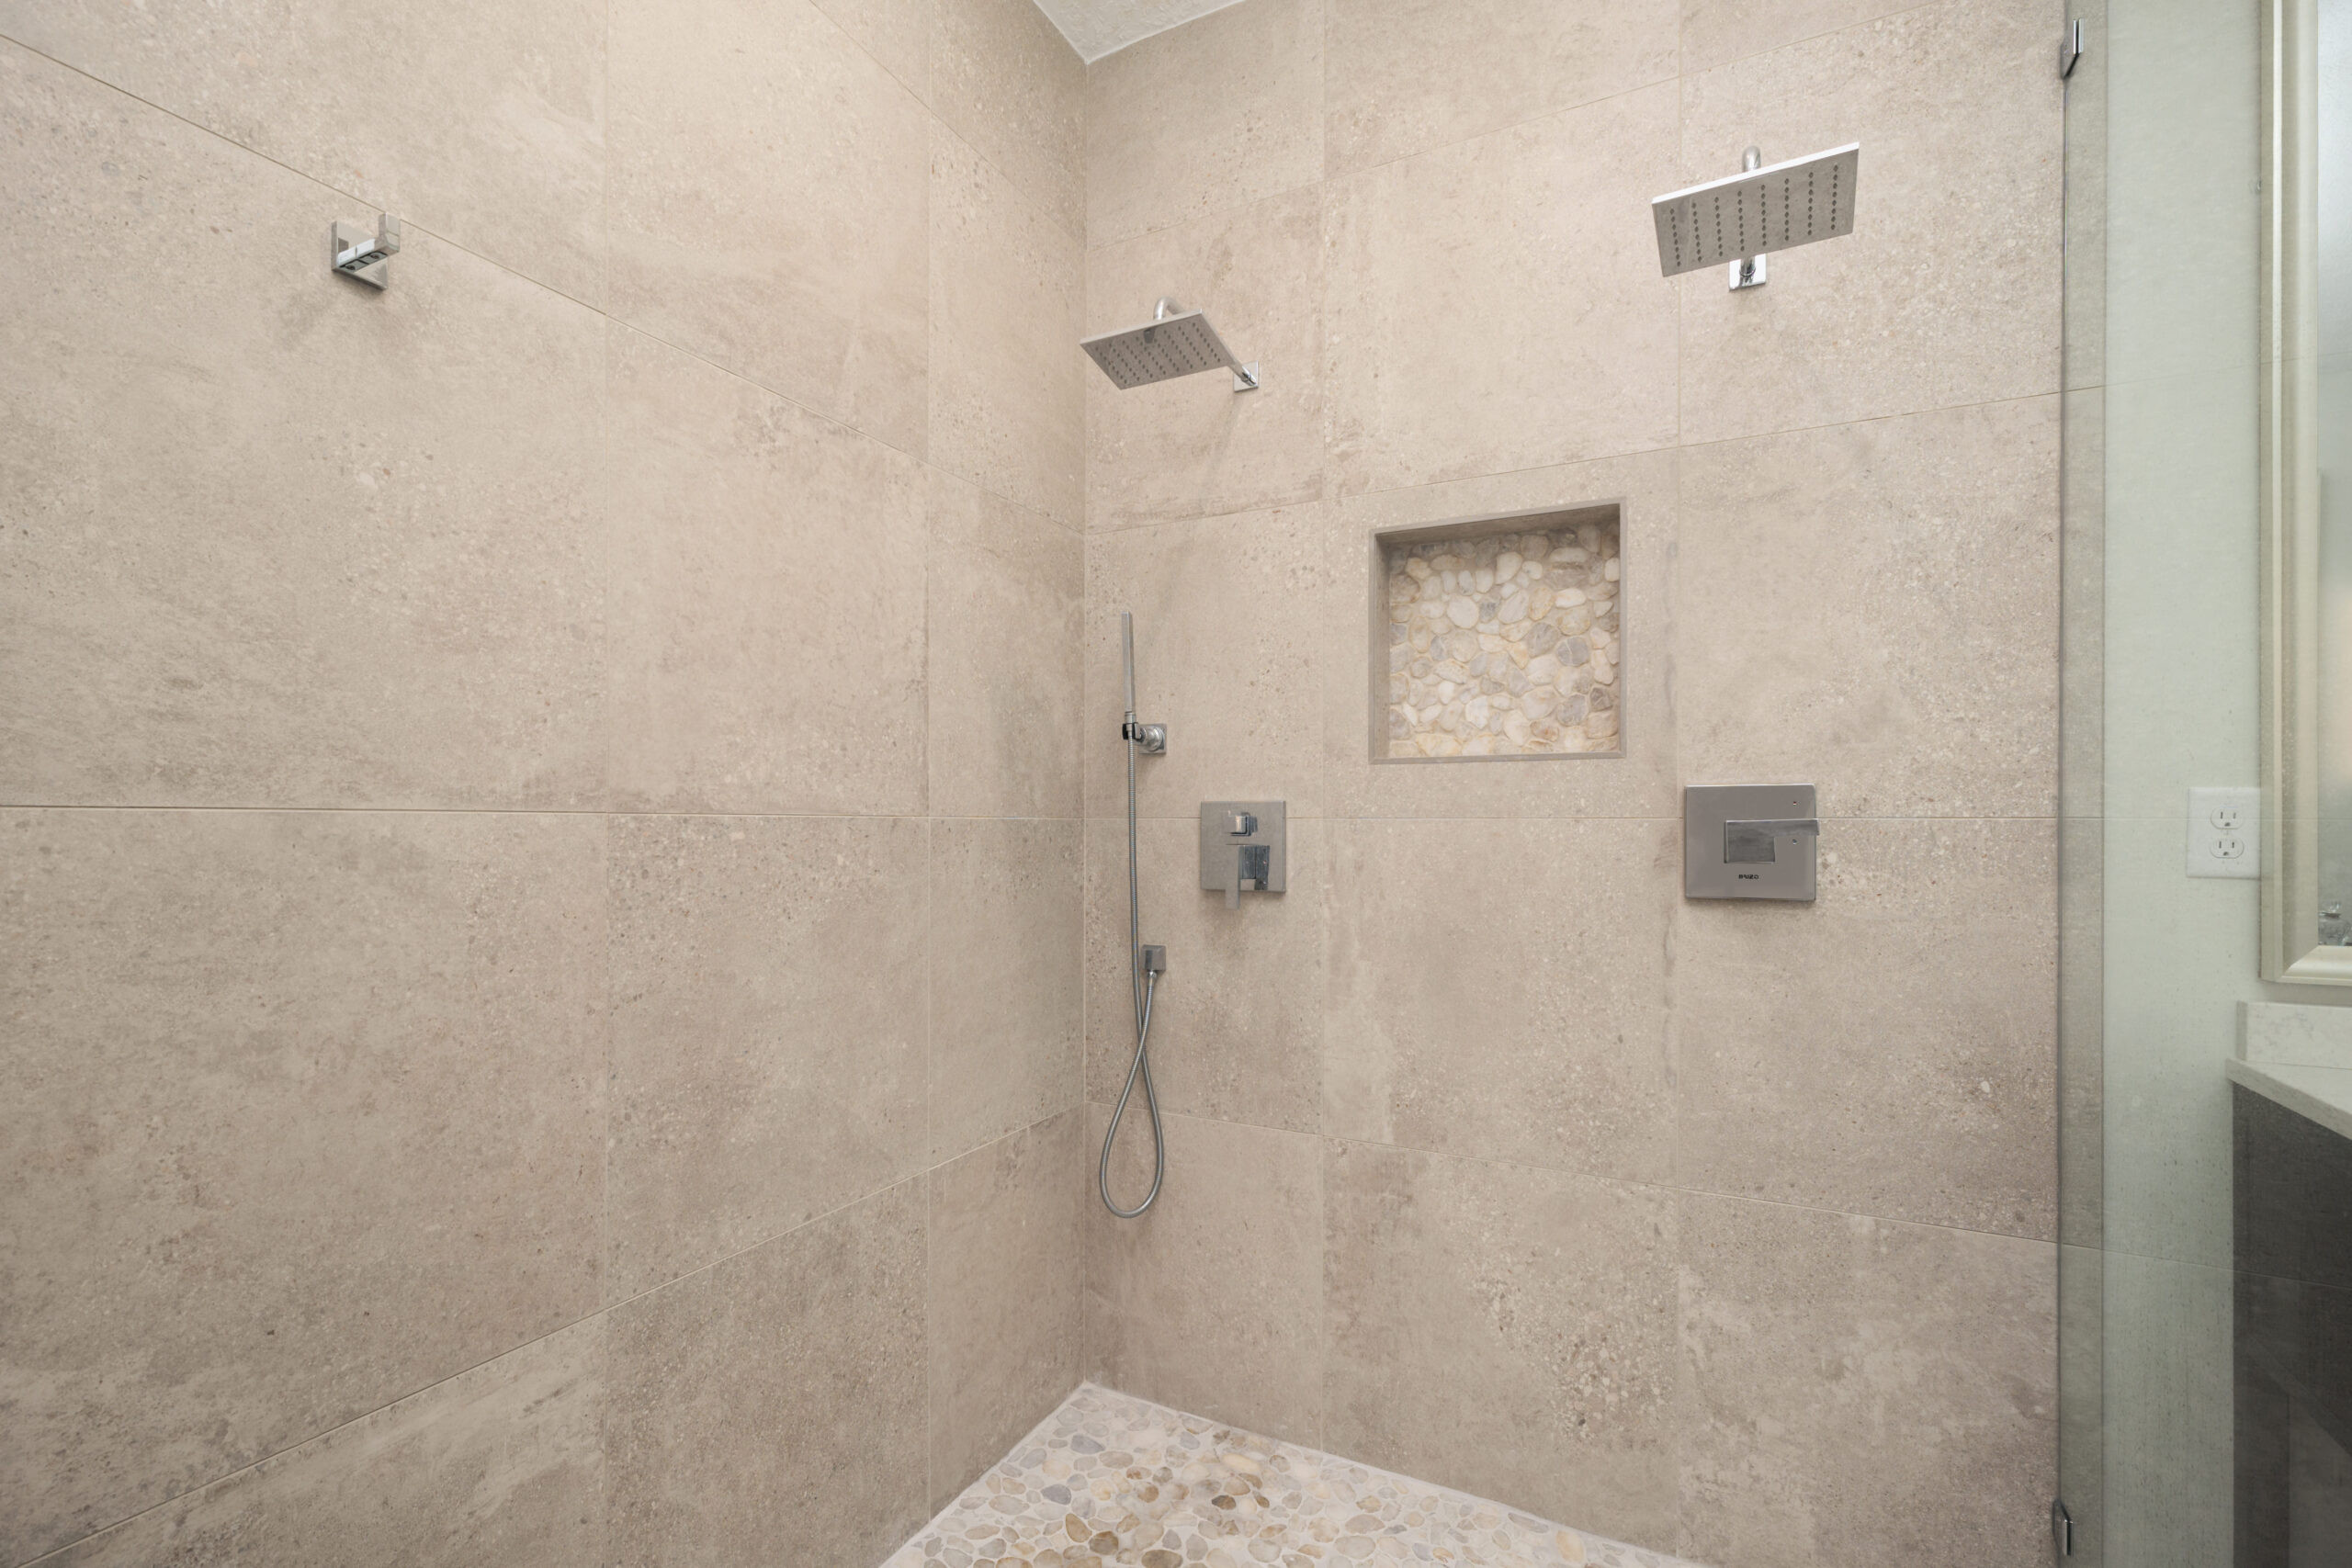 Shower enclosure with tiles all the way to the ceiling and two shower heads for a spa-like feel